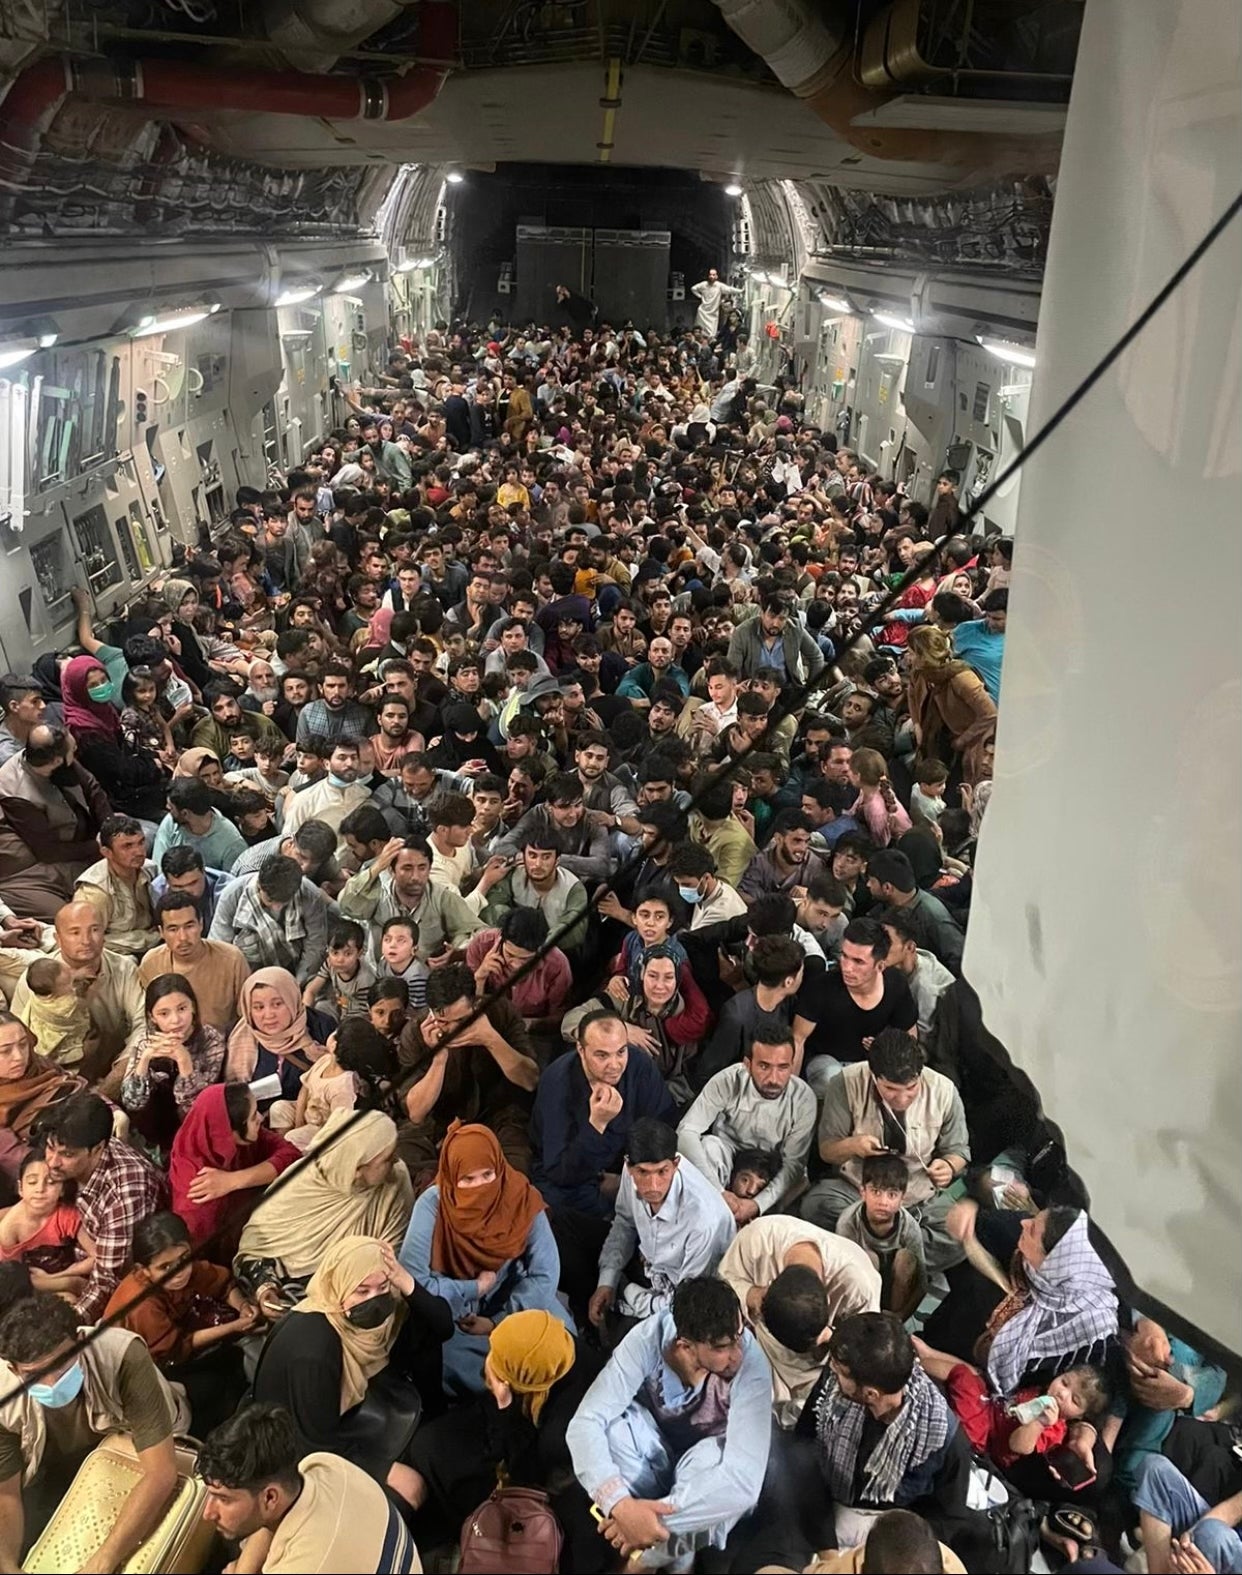 A U.S. Air Force Boeing C-17 Globemaster III safely transported 823 Afghan citizens from Hamid Karzai International Airport on Aug. 15, 2021. (U.S. Air Force).